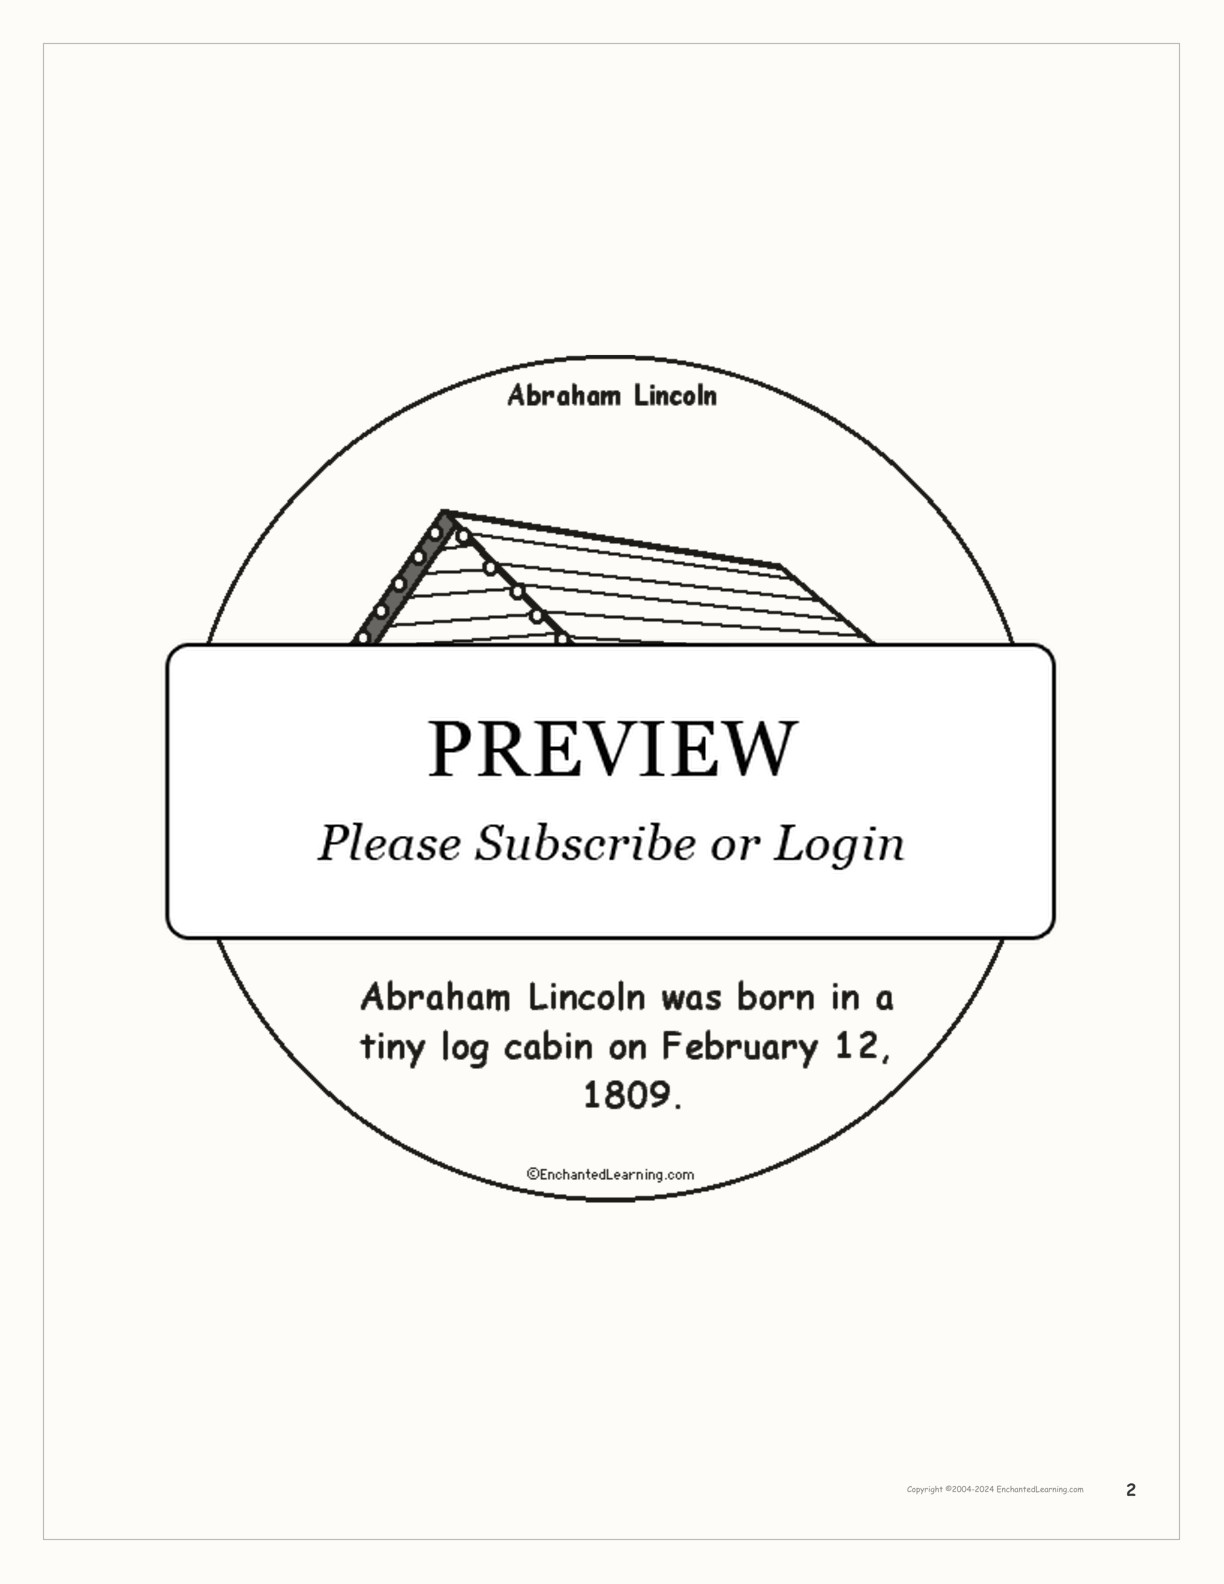 Abraham Lincoln Book interactive printout page 2